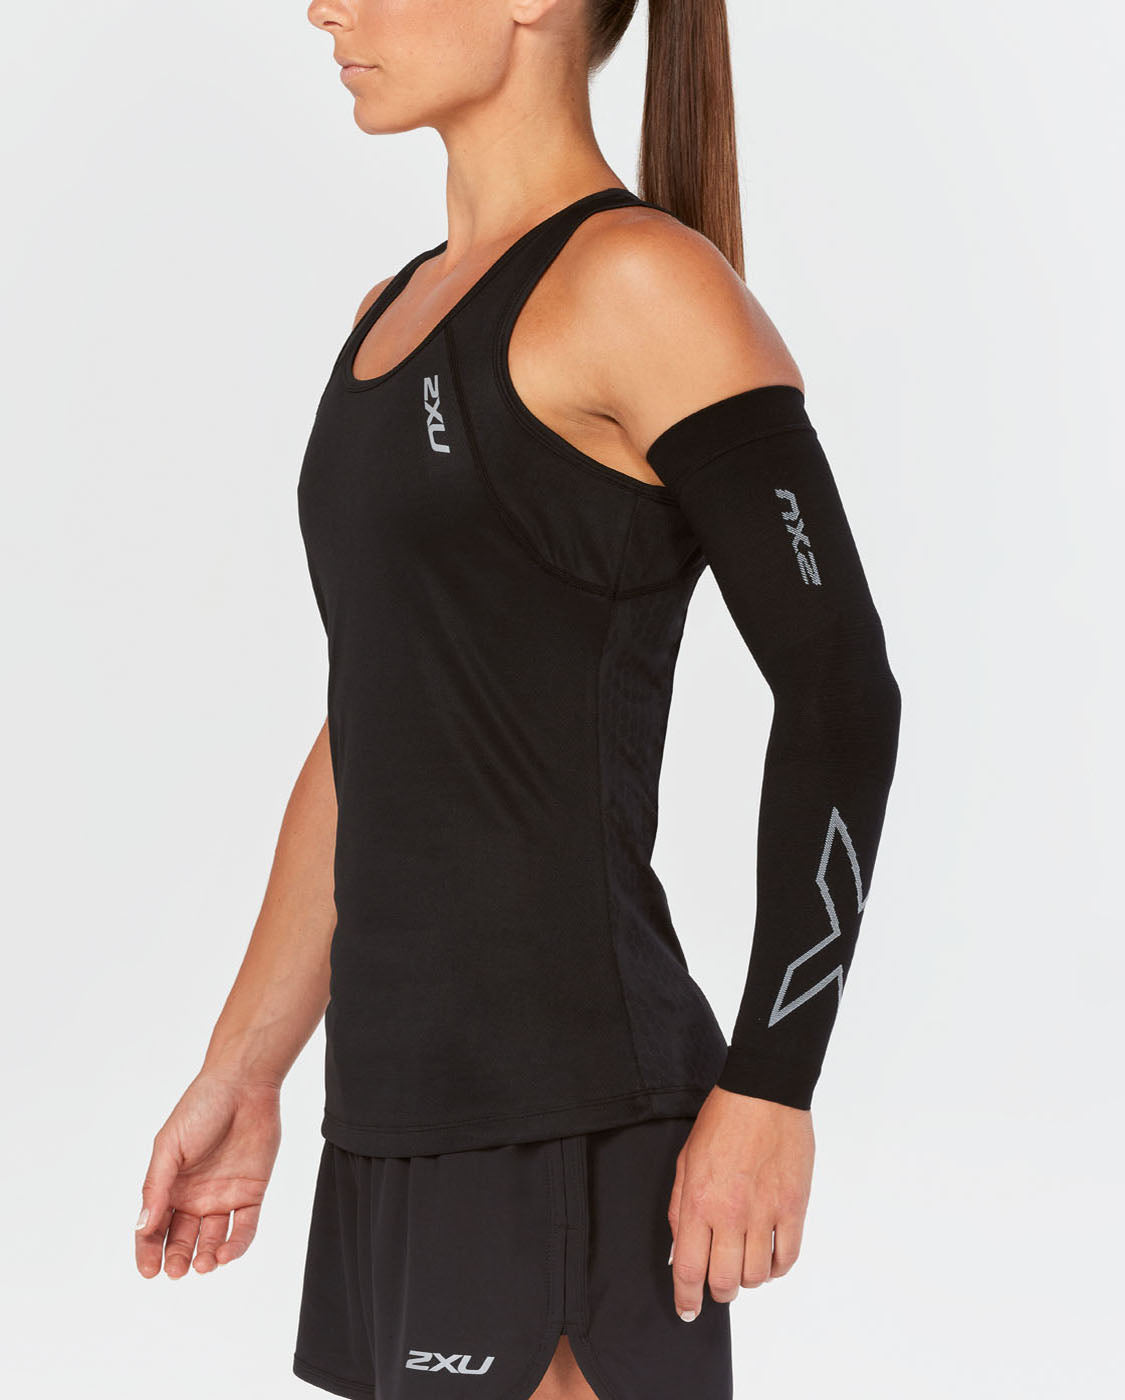 Buy 2XU Unisex Compression Flex Leg Sleeves online from GRIT+TONIC